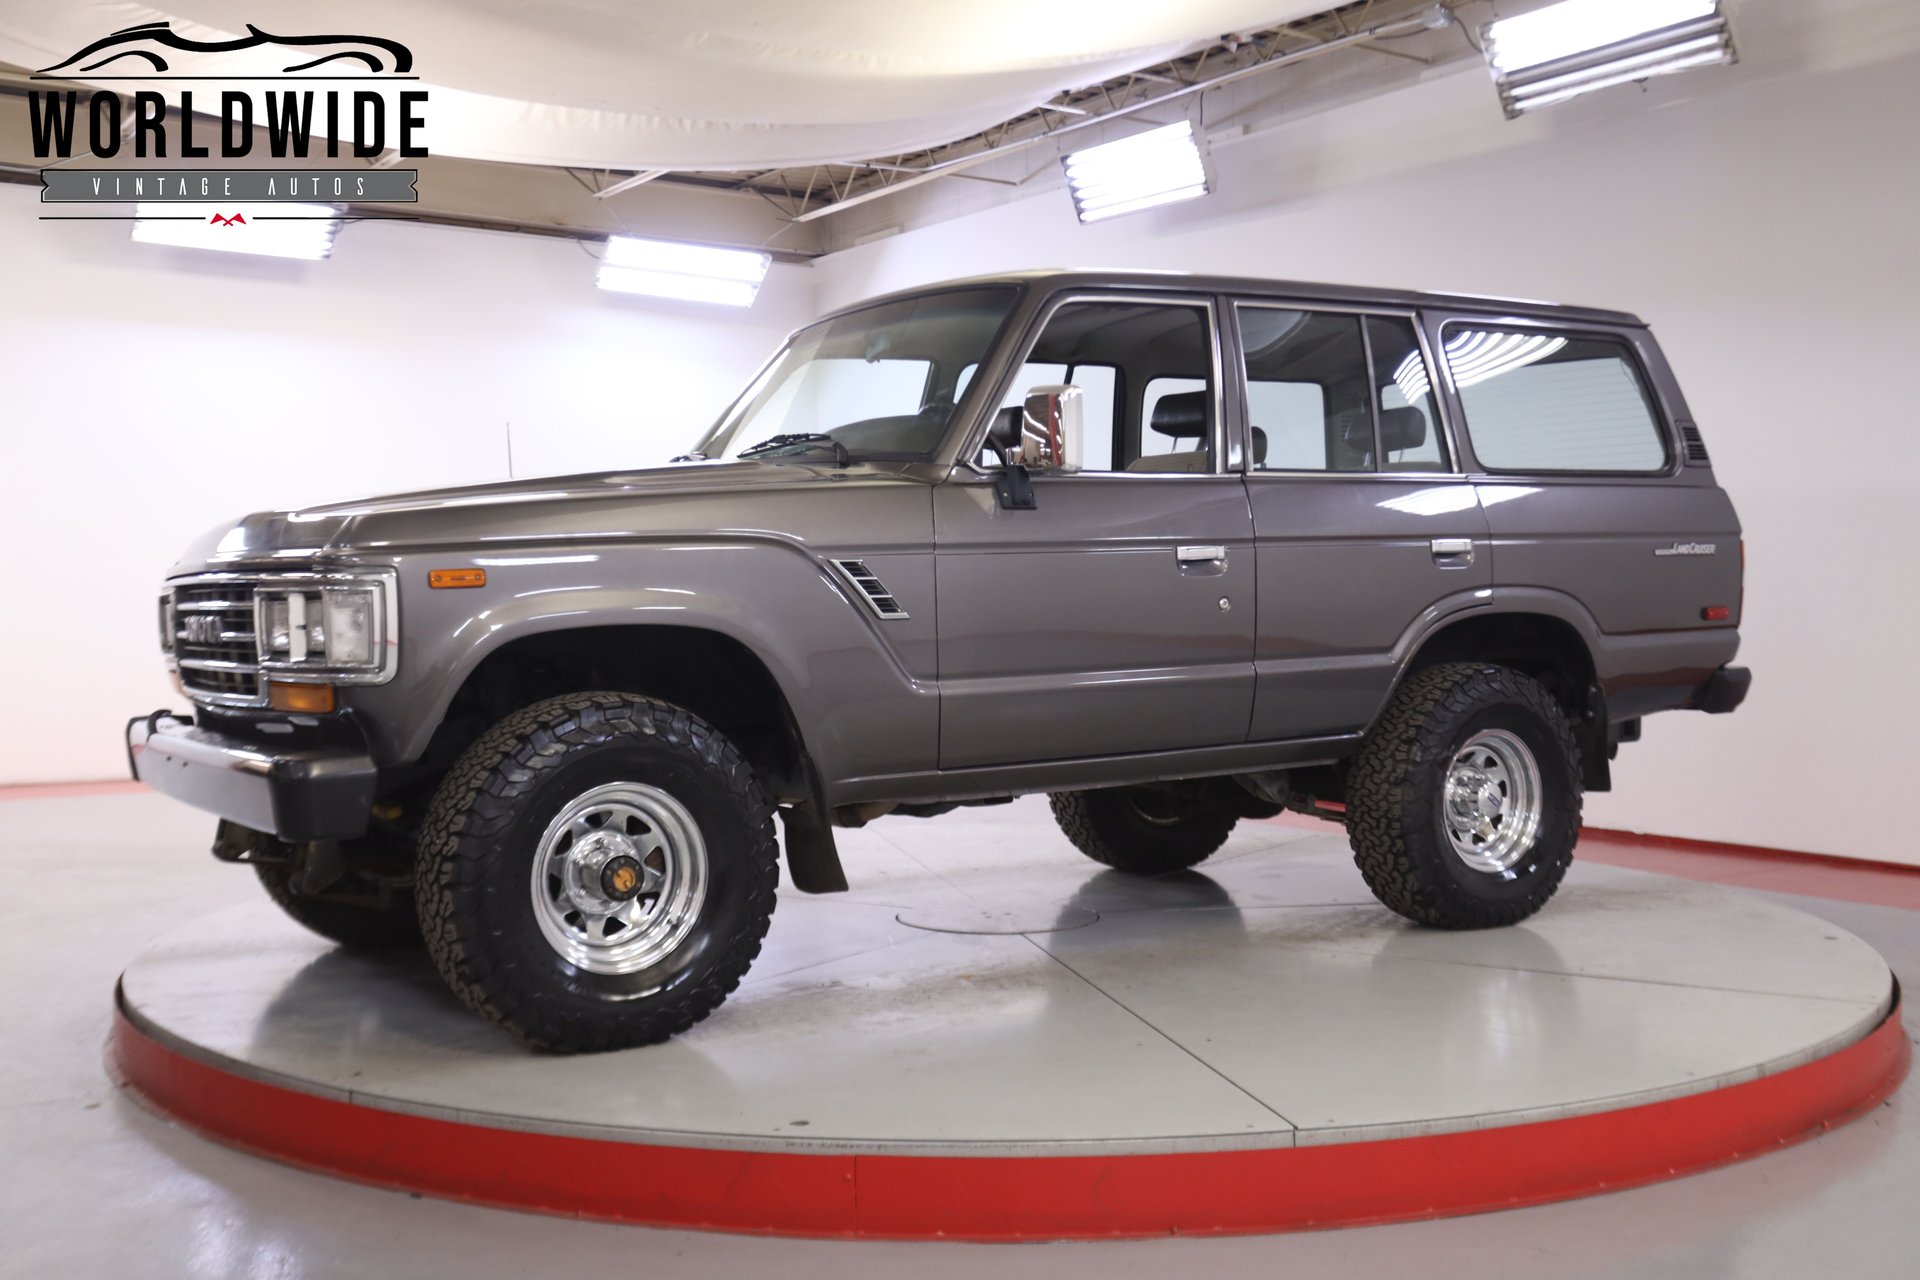 Time Capsule Condition: 1983 Nissan Patrol 4x4